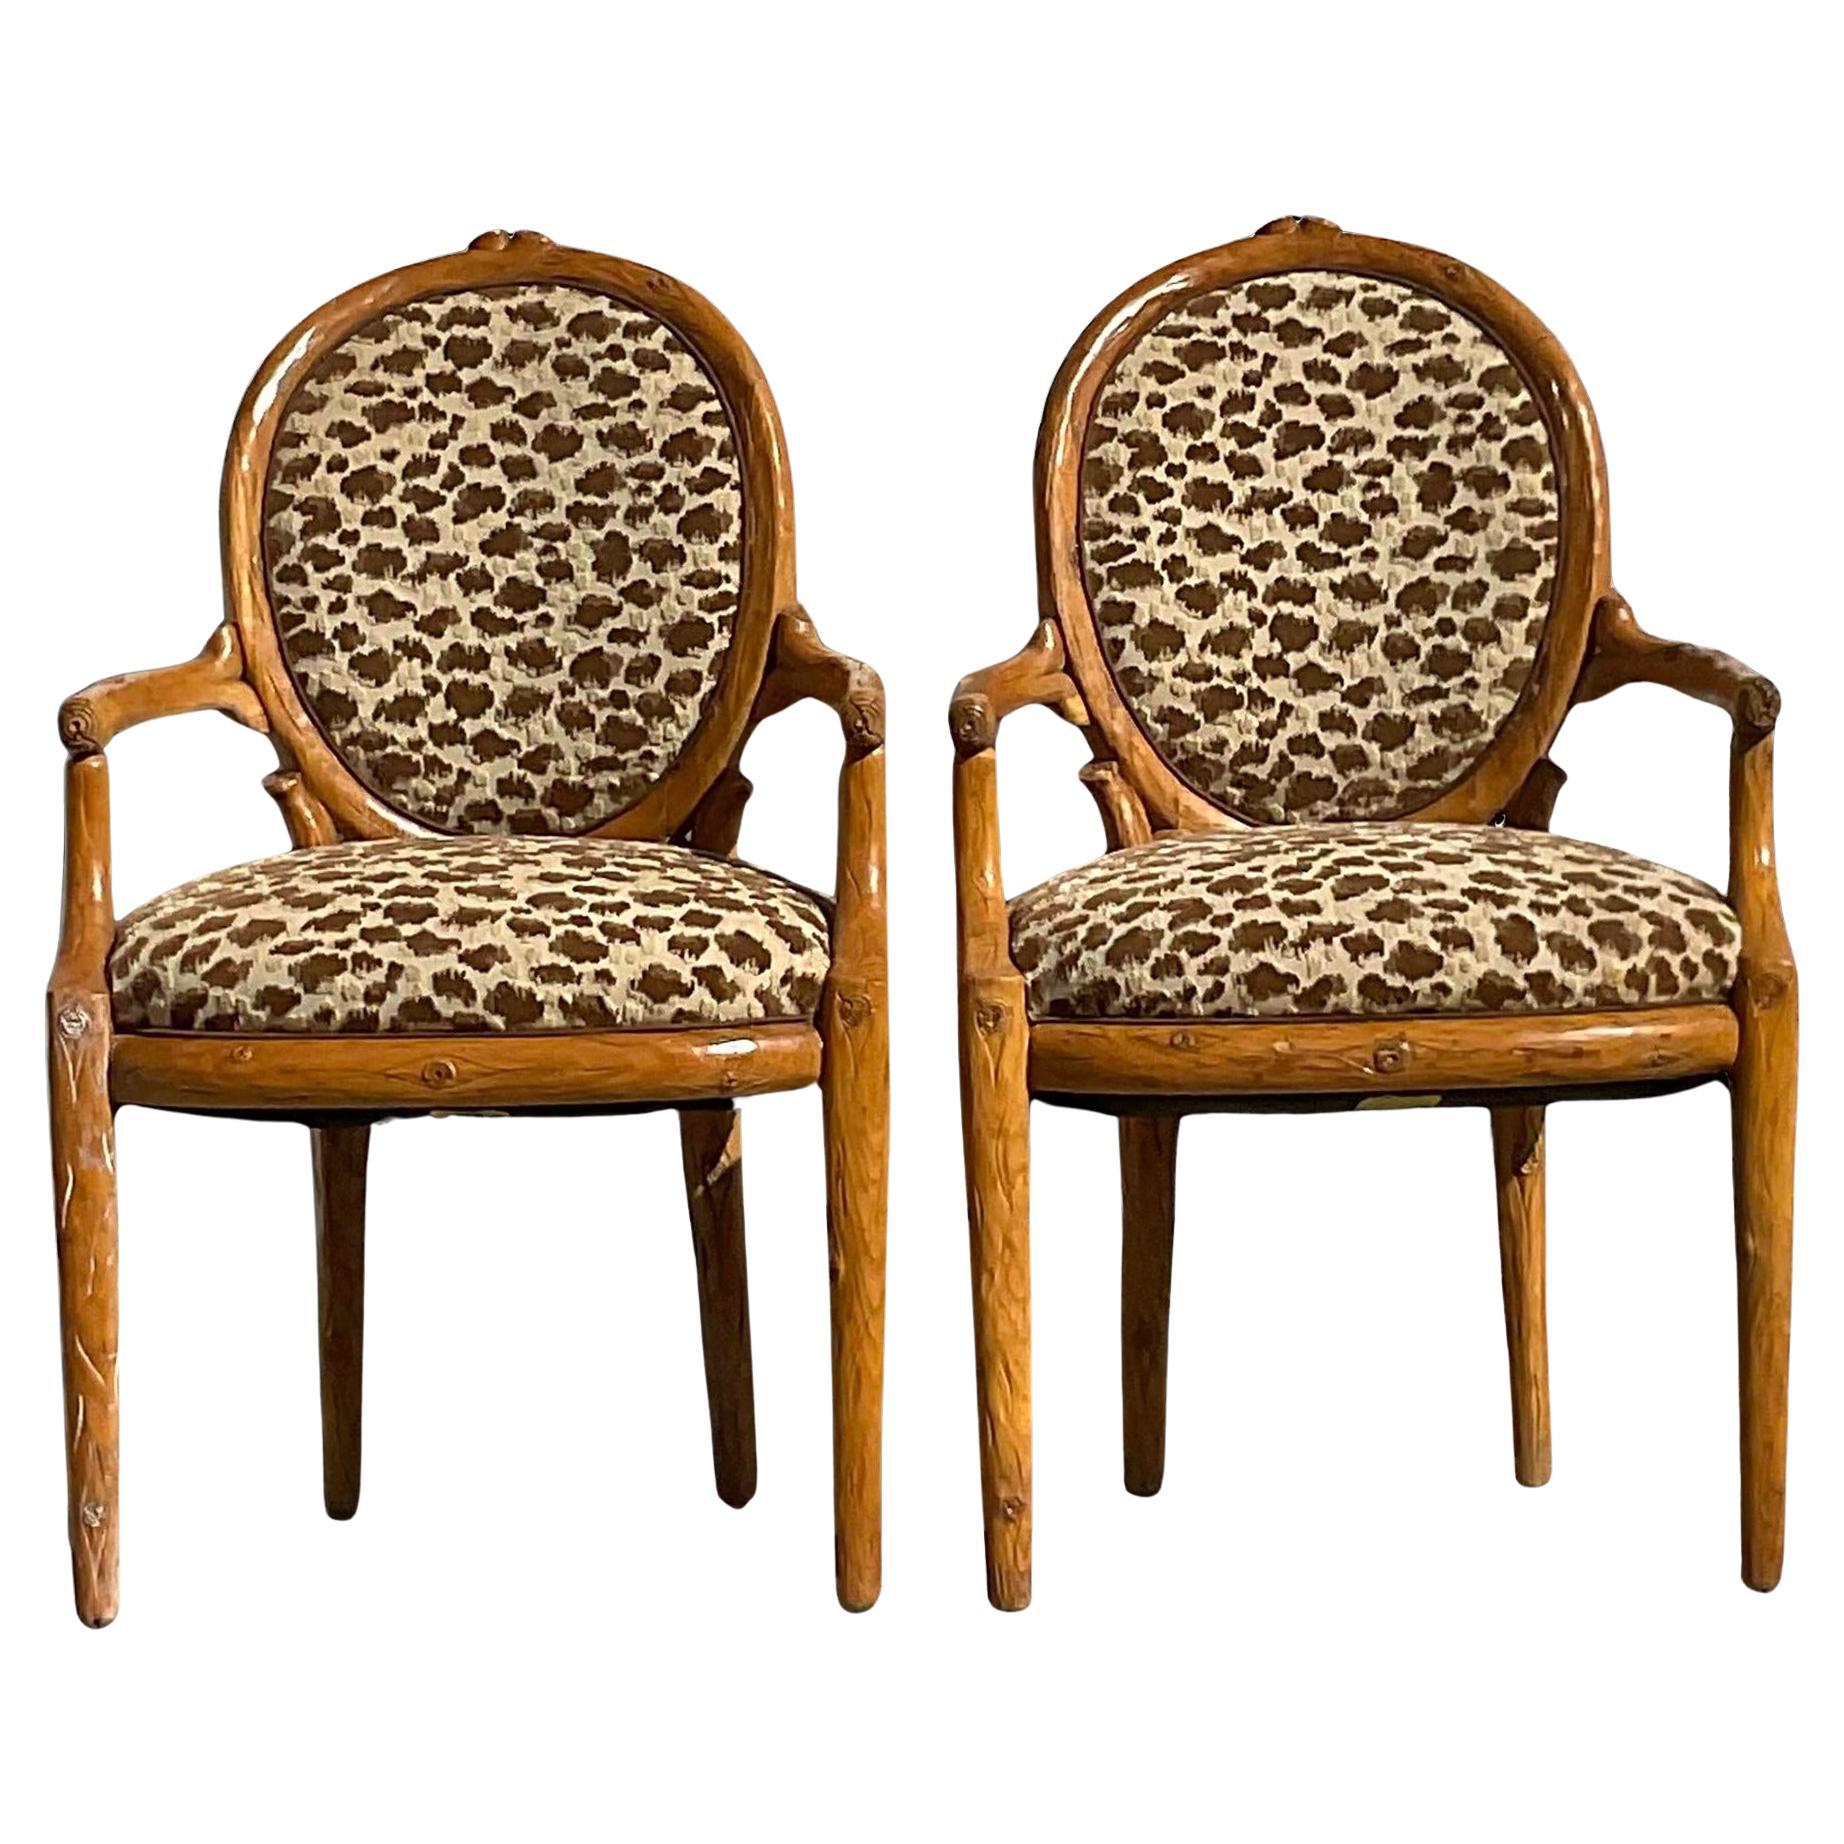 Vintage Boho Carved Faux Bois Arm Chairs - a Pair